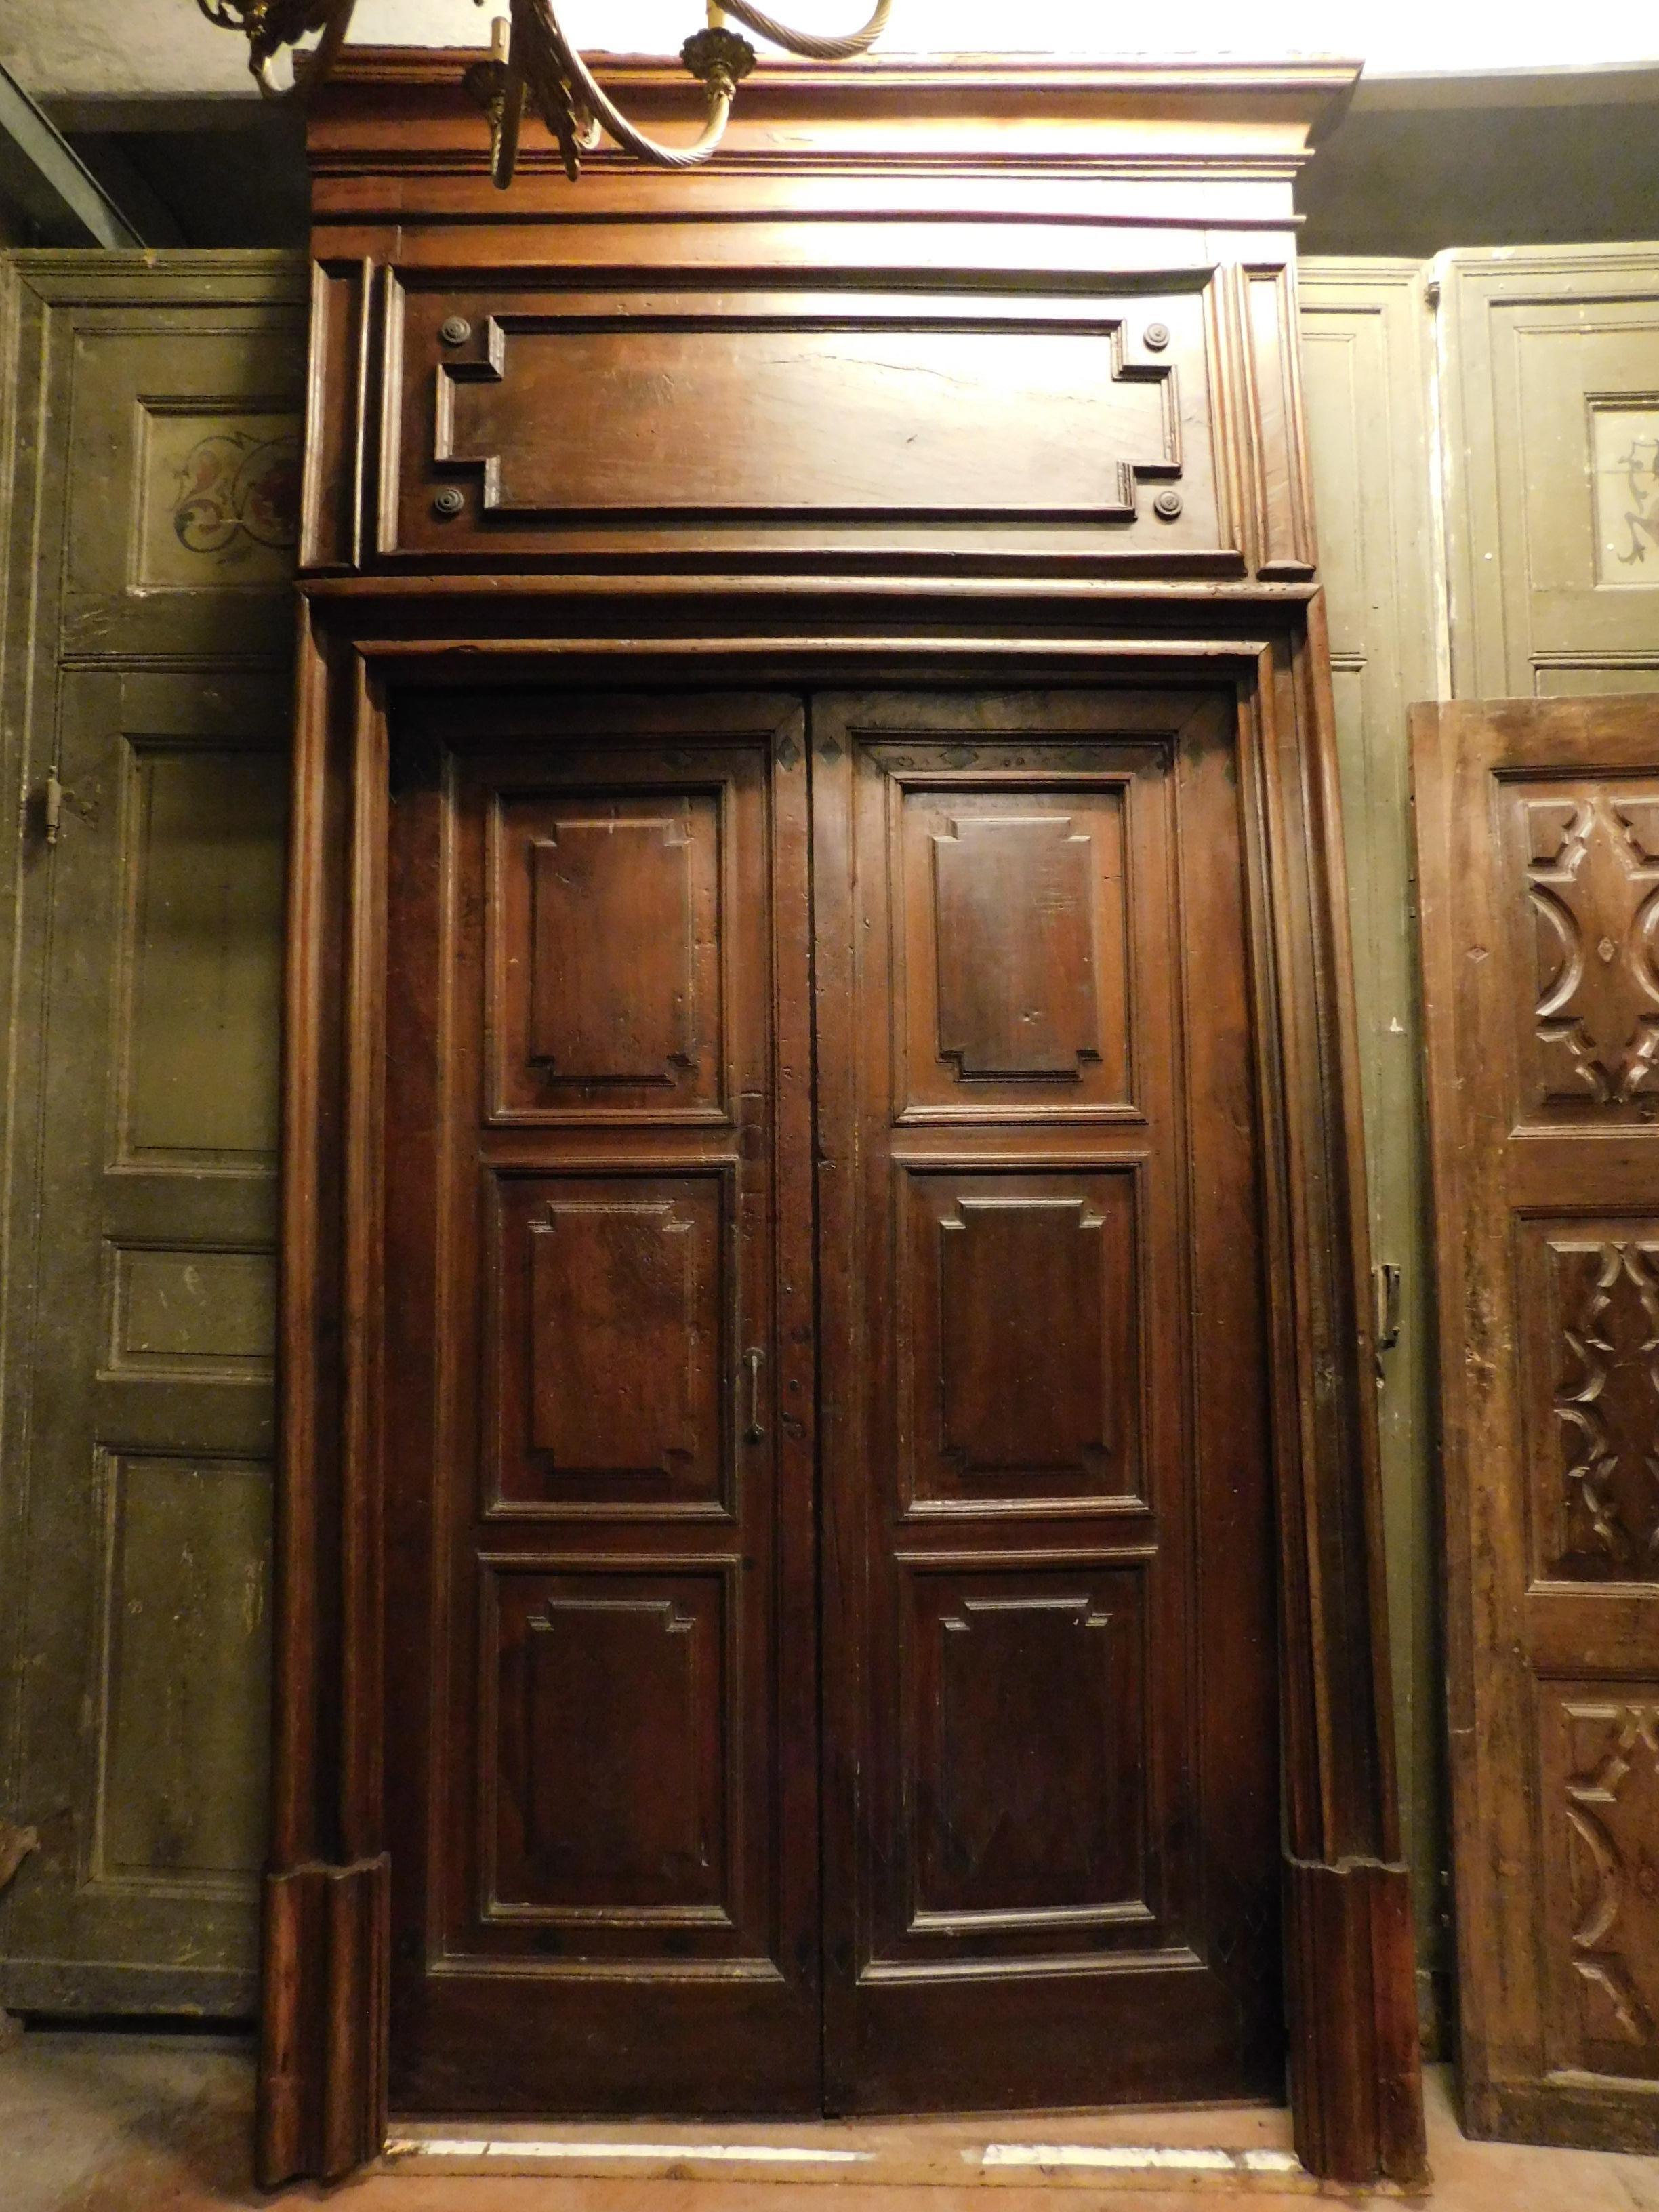 Ancient entrance door, main door, built and hand-carved in precious walnut wood, original and complete with portal, made in the 18th century, for an important building in the historic center in northern Italy.
Ideal for entrances to important